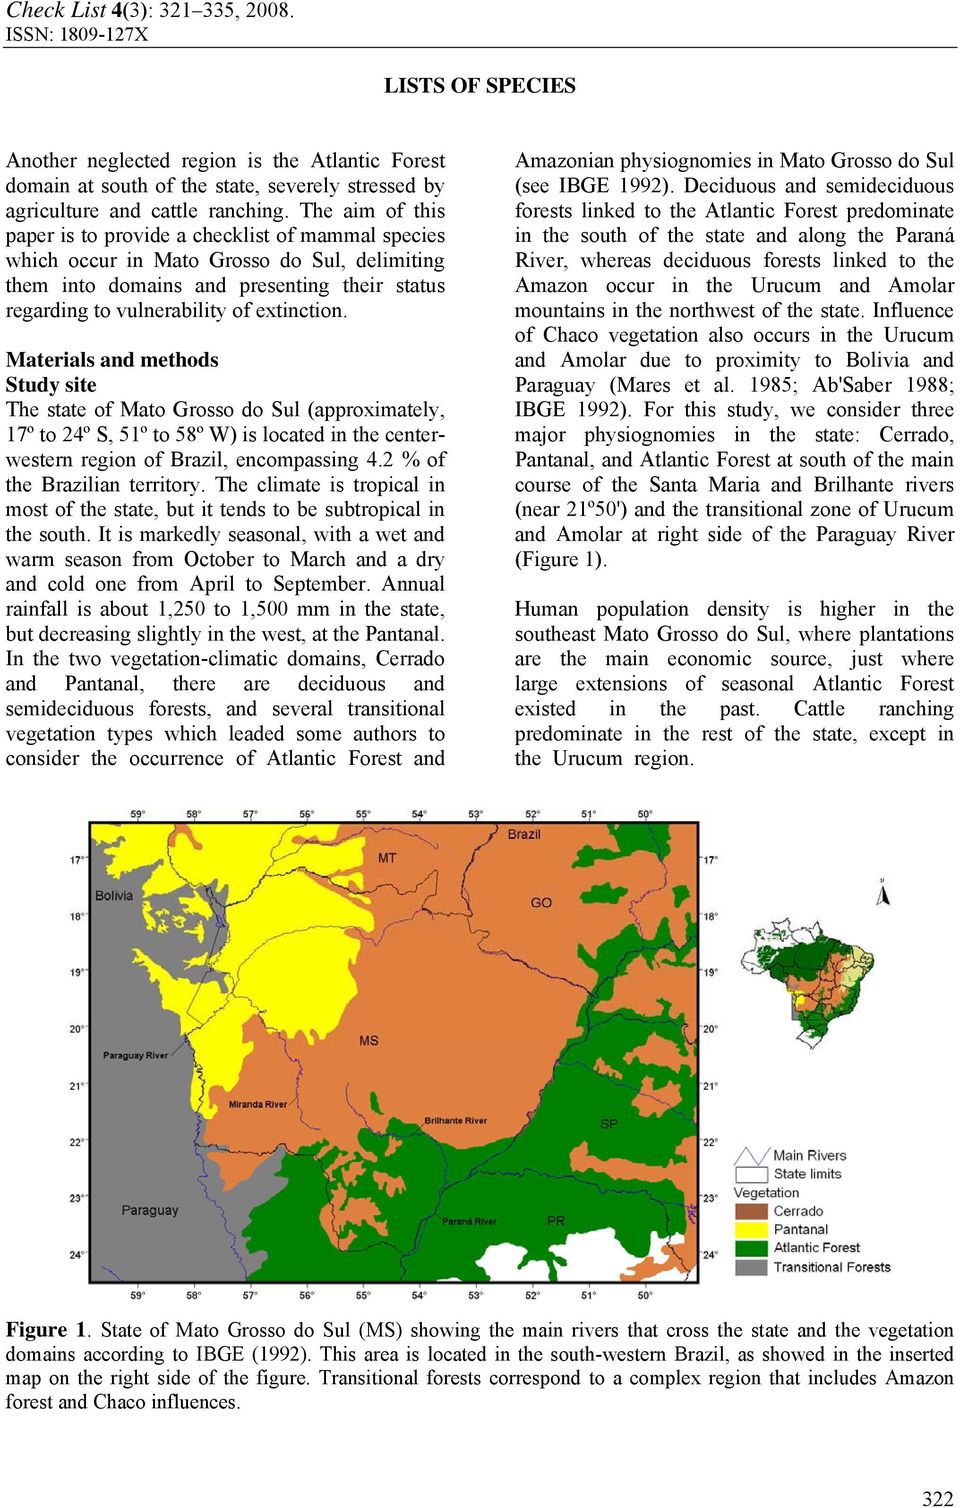 Materials and methods Study site The state of Mato Grosso do Sul (approximately, 17º to 24º S, 51º to 58º W) is located in the centerwestern region of Brazil, encompassing 4.